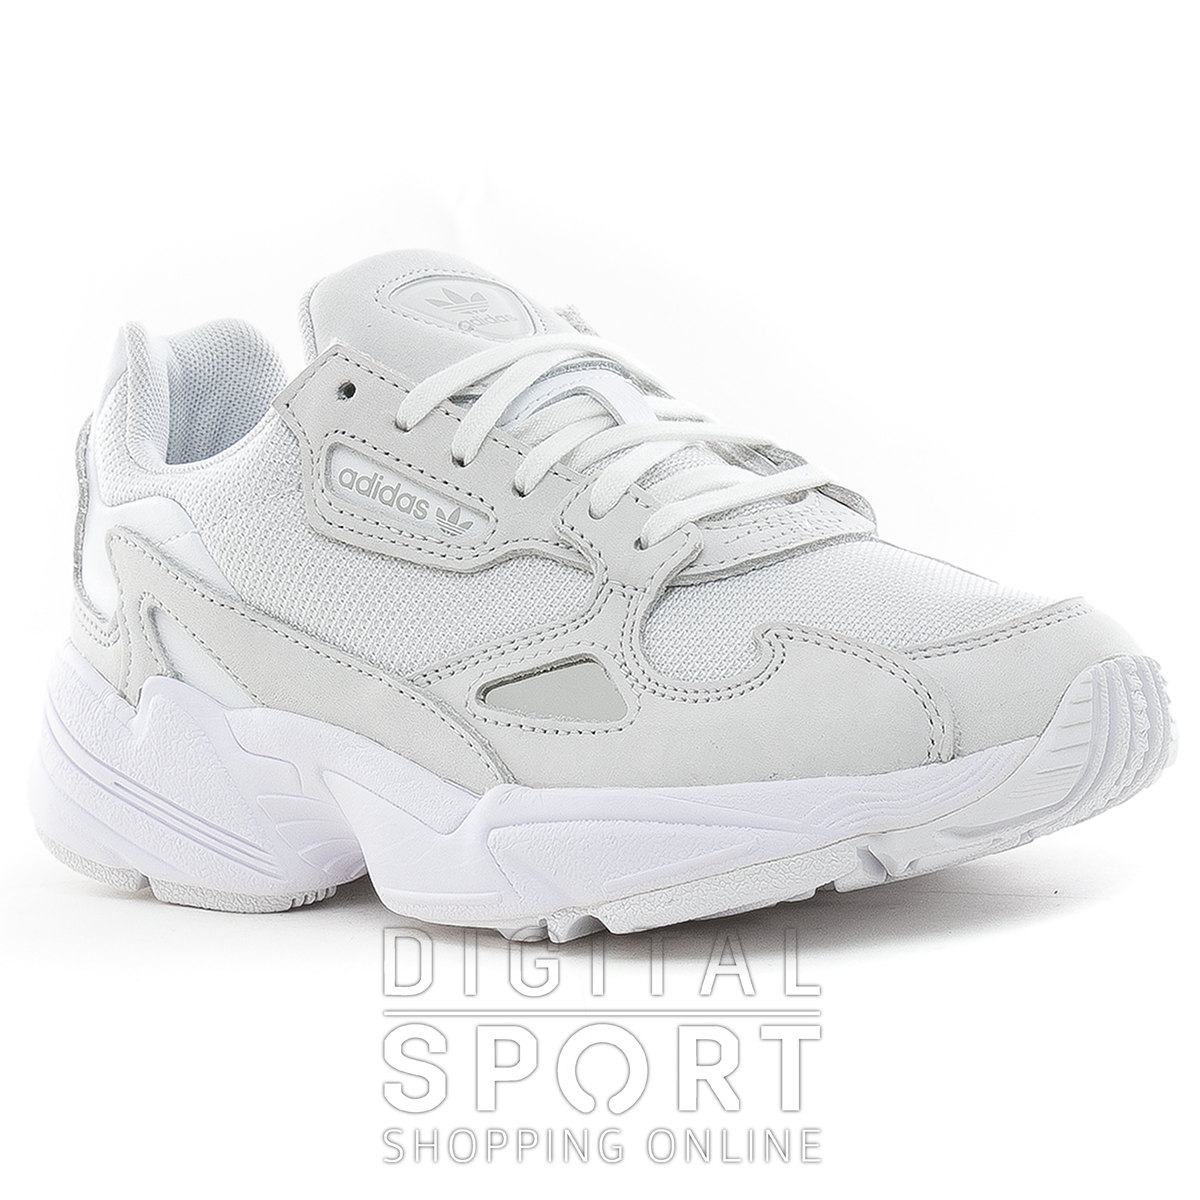 adidas falcon negras y blancas,New daily offers,ruhof.co.uk